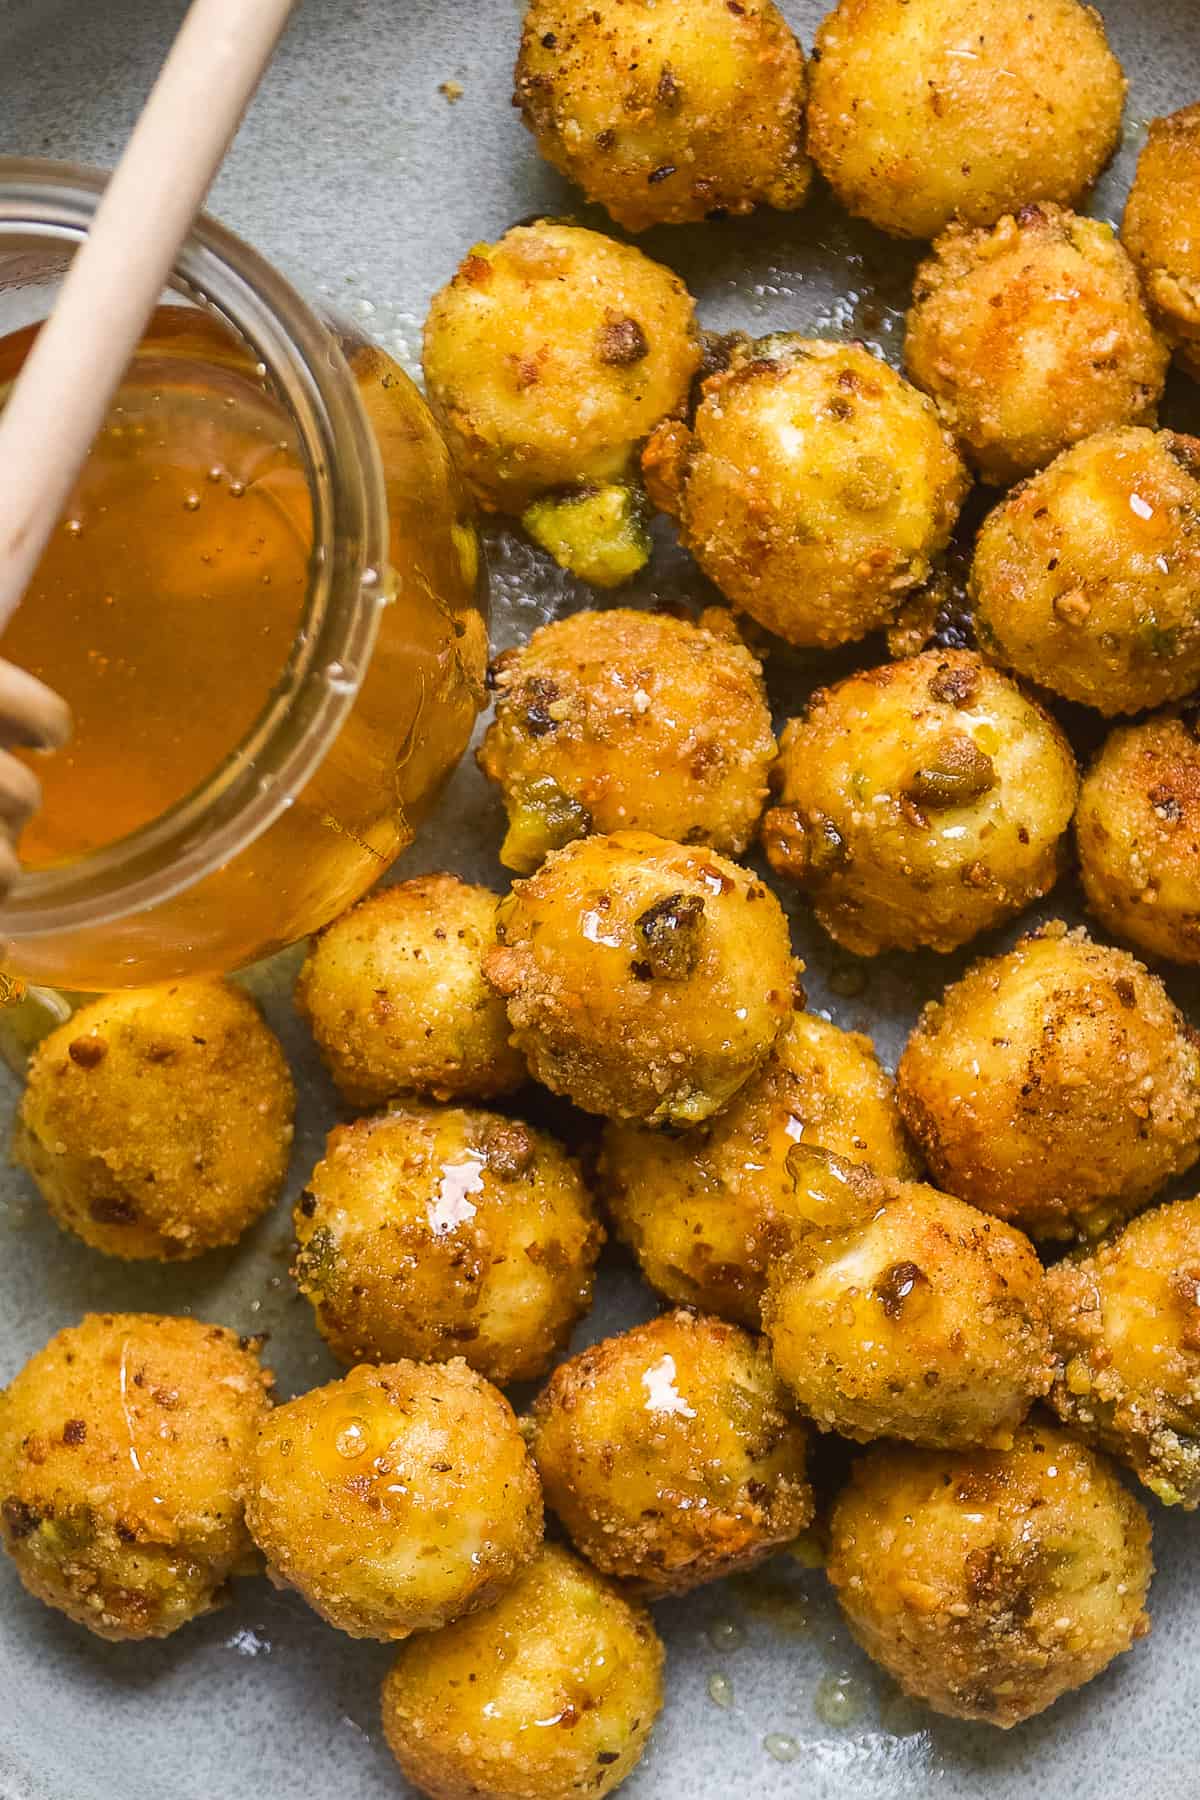 Up close view of fried goat cheese balls on a blue plate